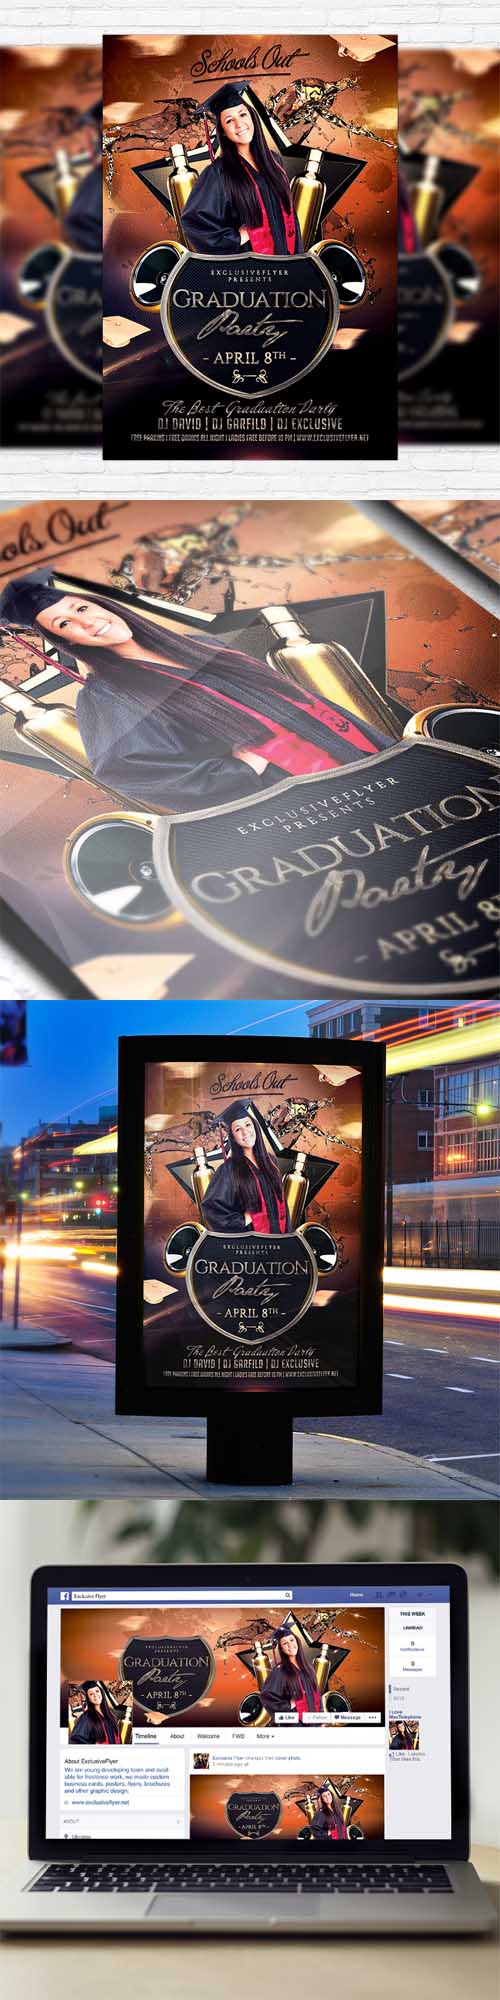 Flyer Template - Graduation Party + Facebook Cover